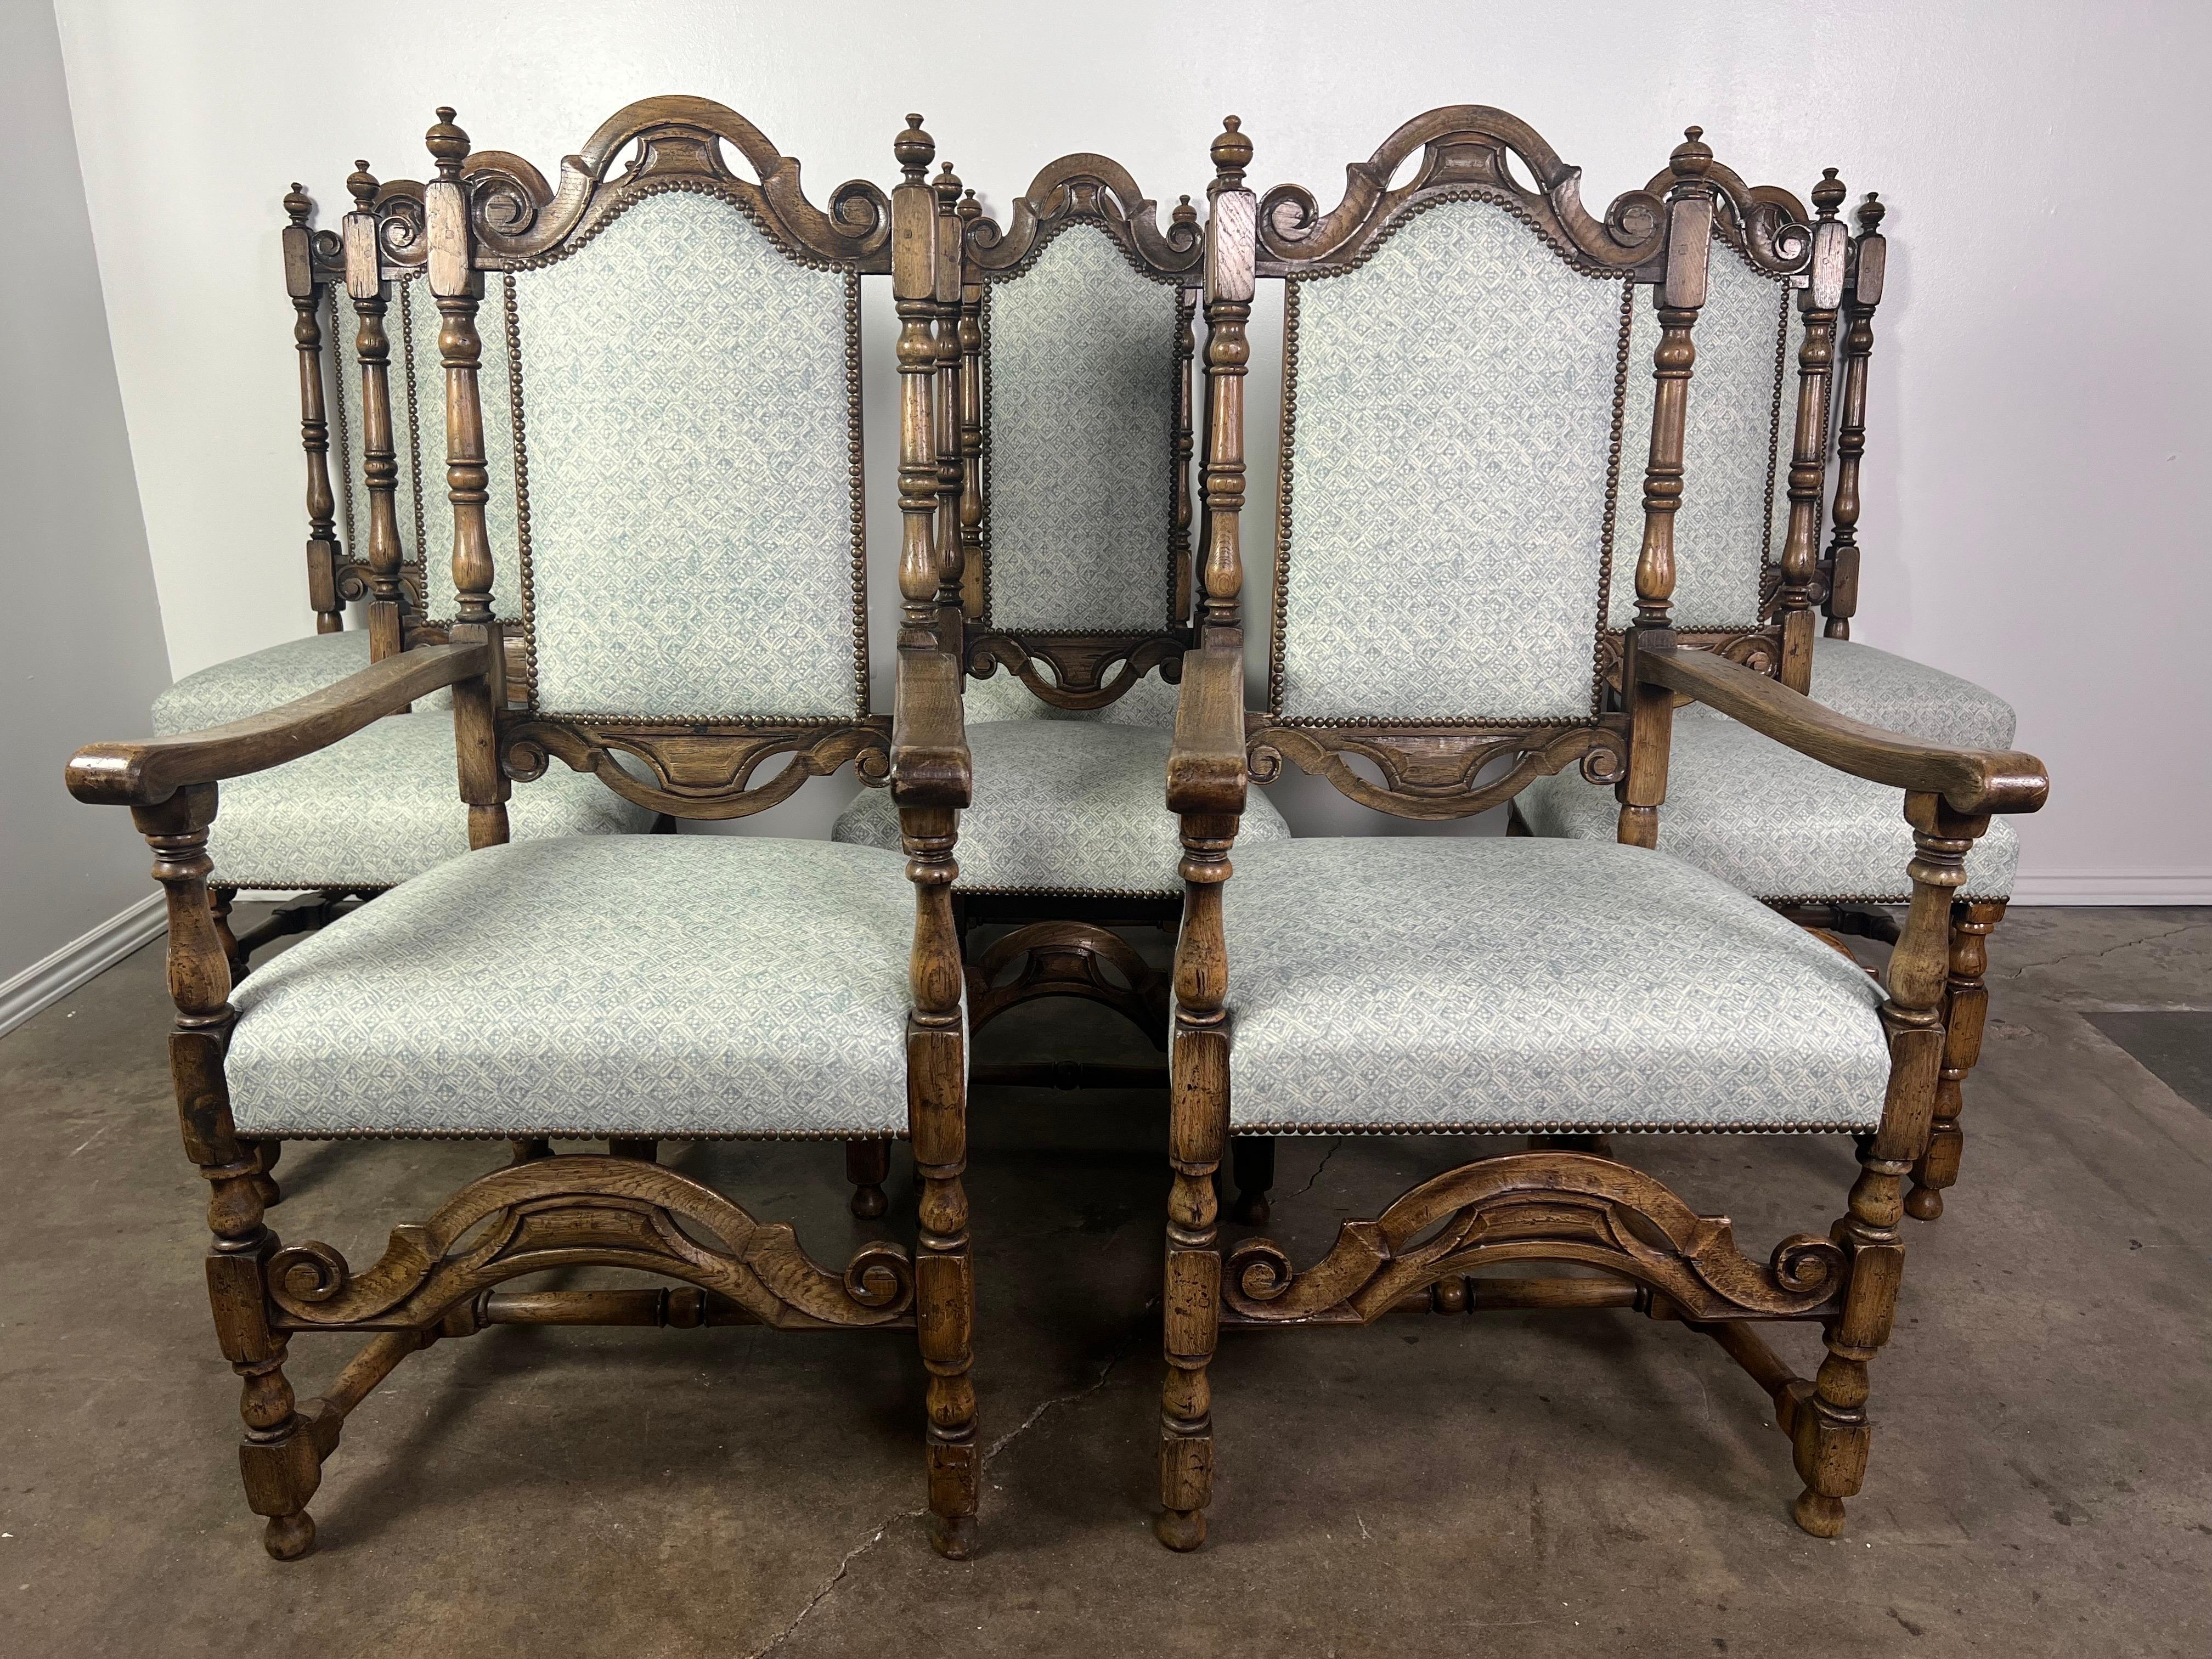 Set of eight 19th century Jacobean style English dining chairs with Jacobean carving and turned elements throughout. These recangular shaped set has been newly upholstered in a modern fresh printed bluish gray & cream printed linen with nailhead